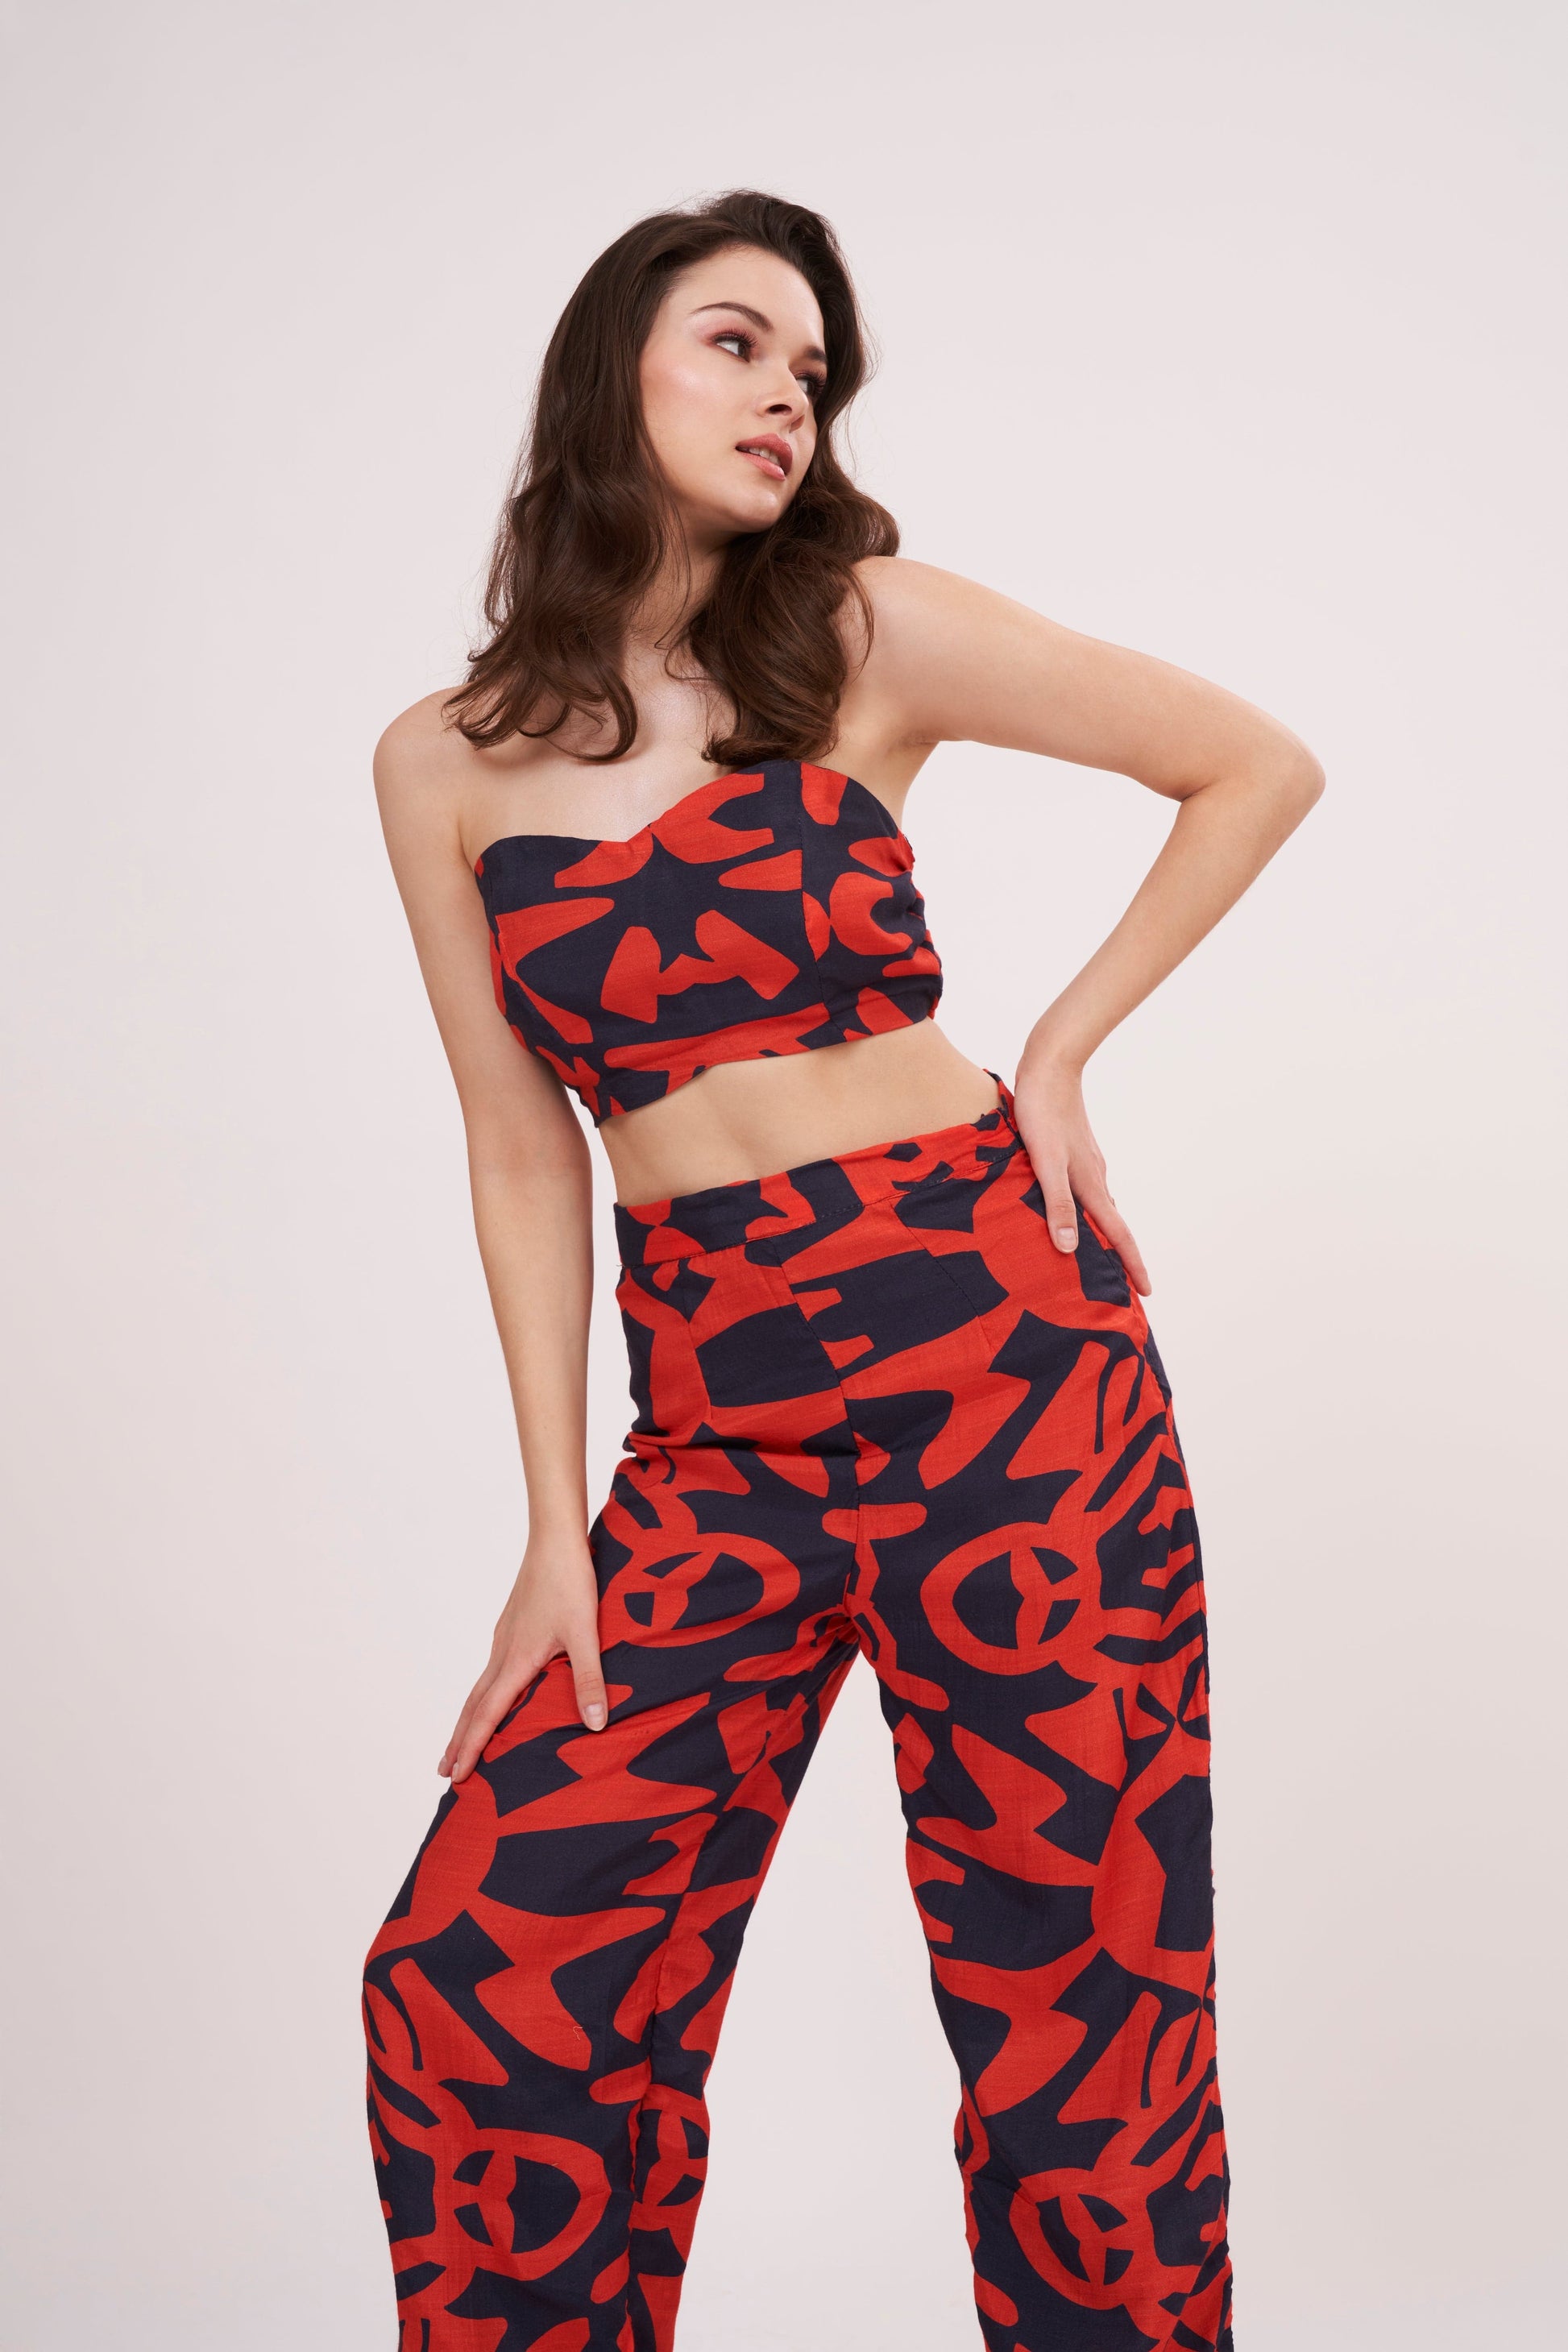 Stylish V-neck muslin crop top with geometric print from Designer Co Ord Set, for a flattering and chic look